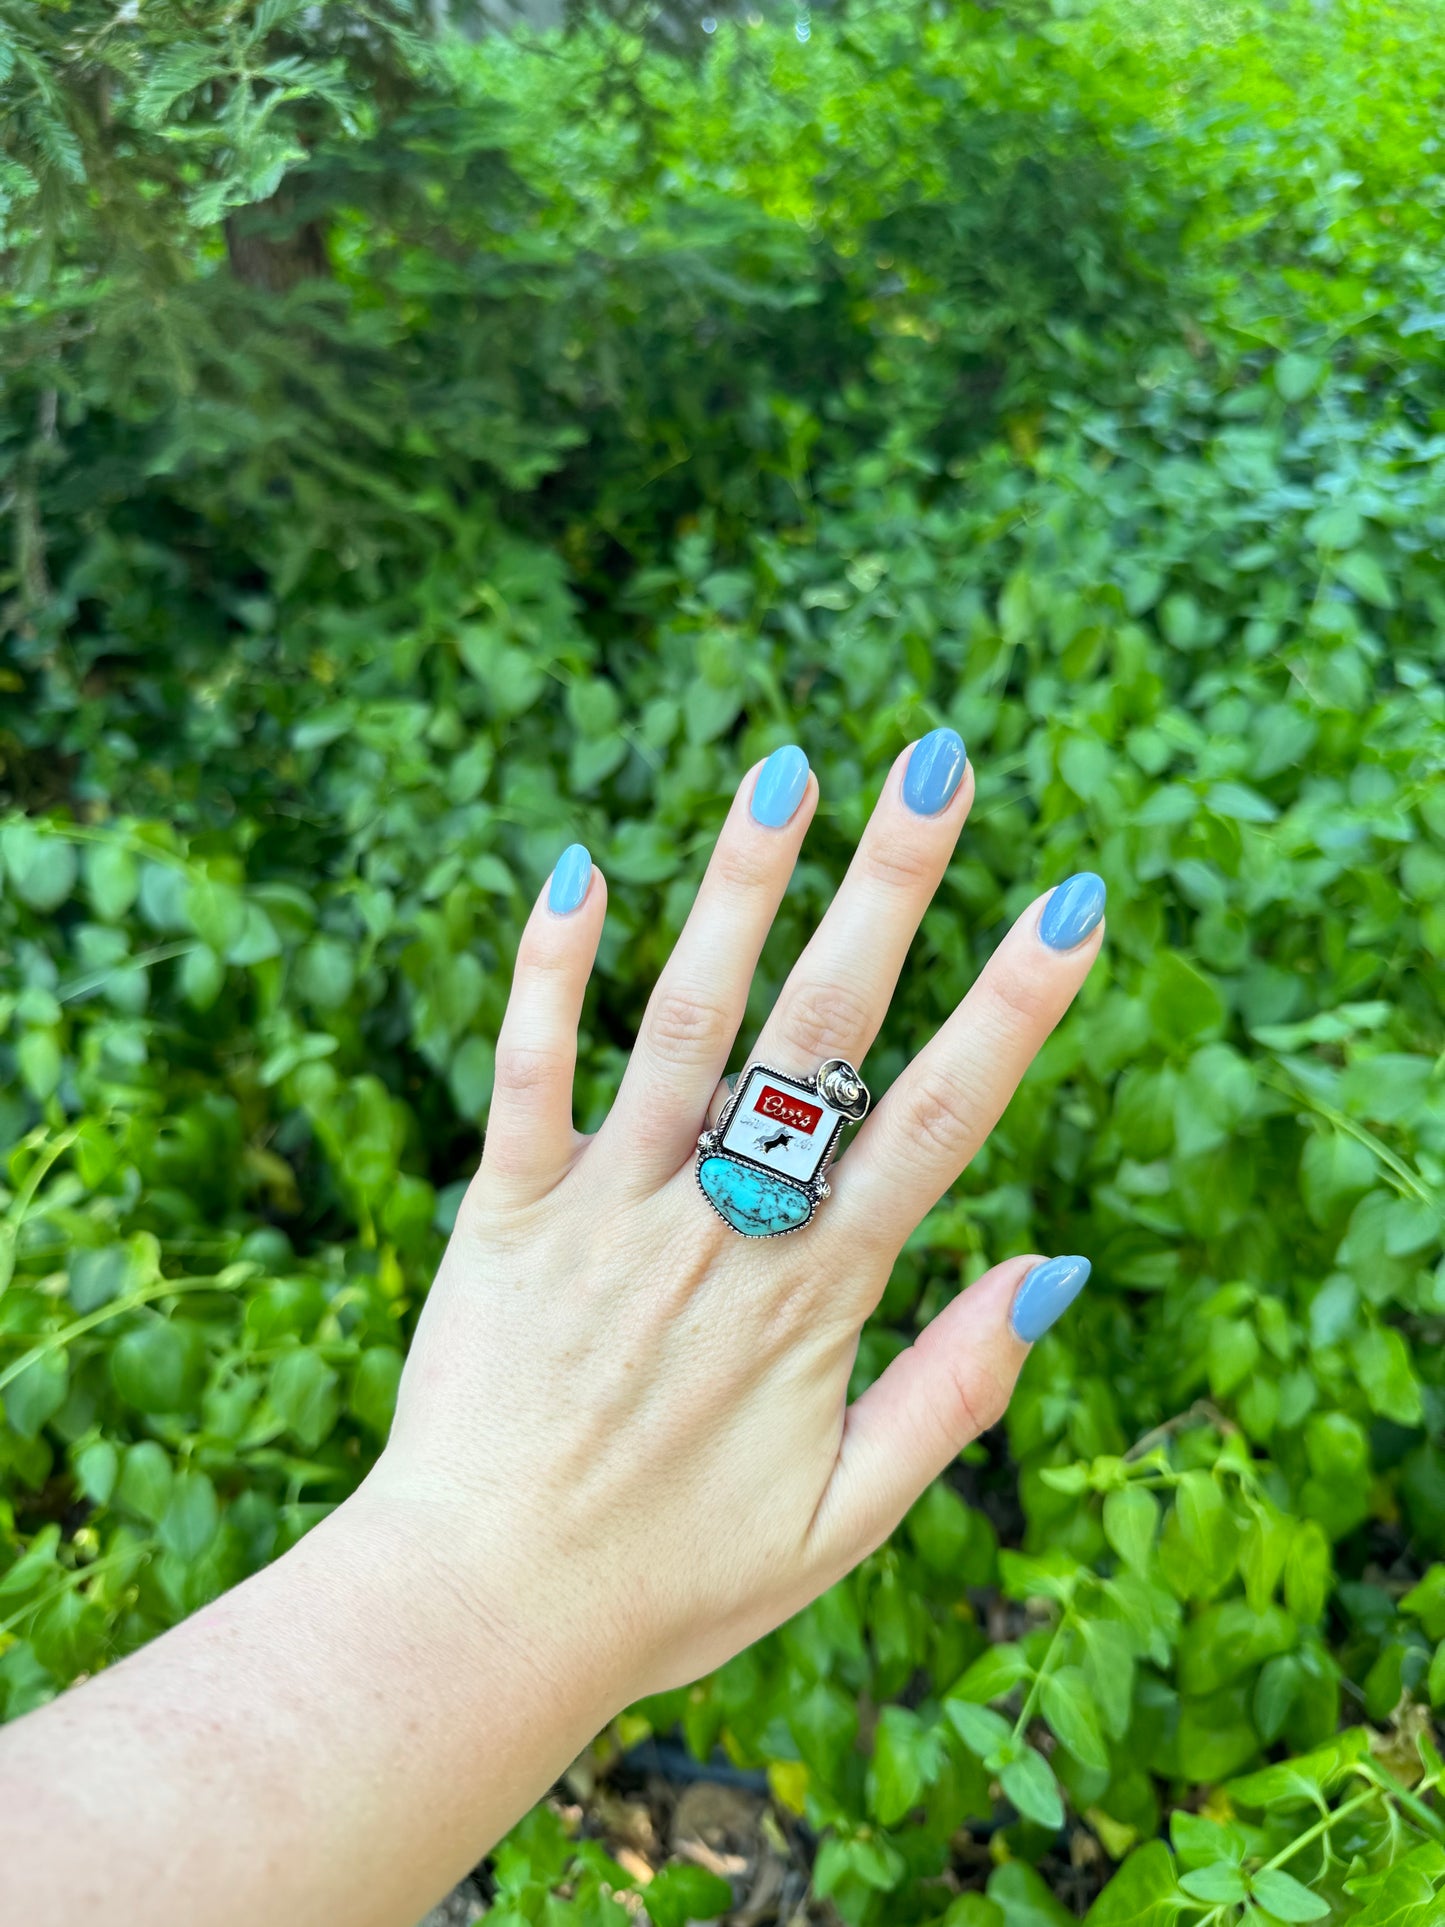 Coors/Miller Turquoise Rings